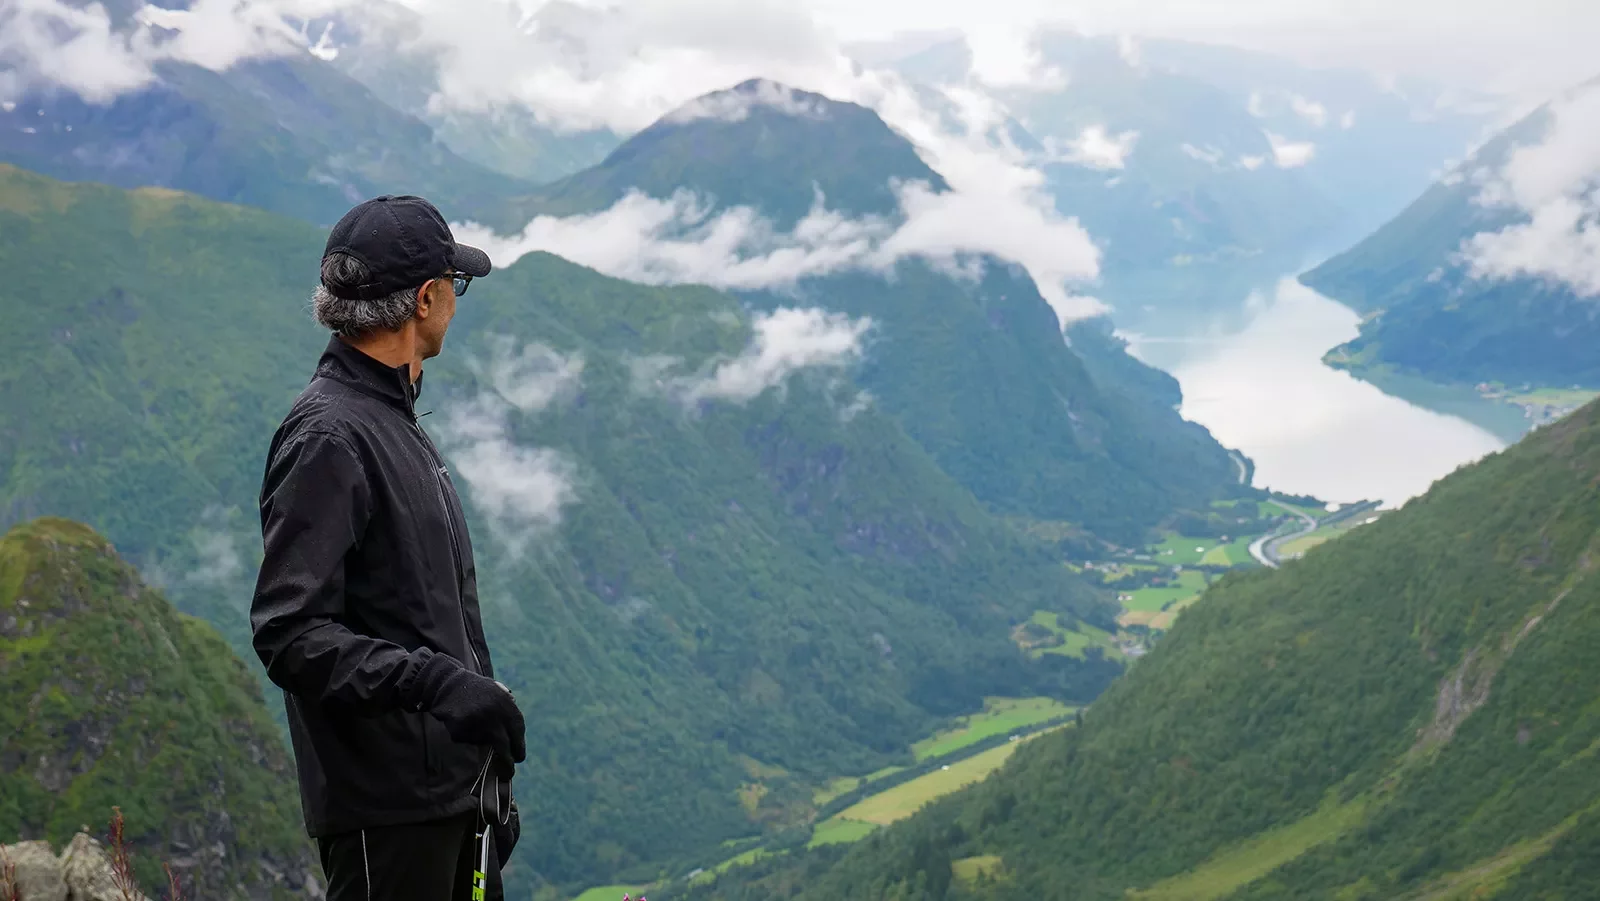 Solo hiker looking out over a lush green valley in Norway